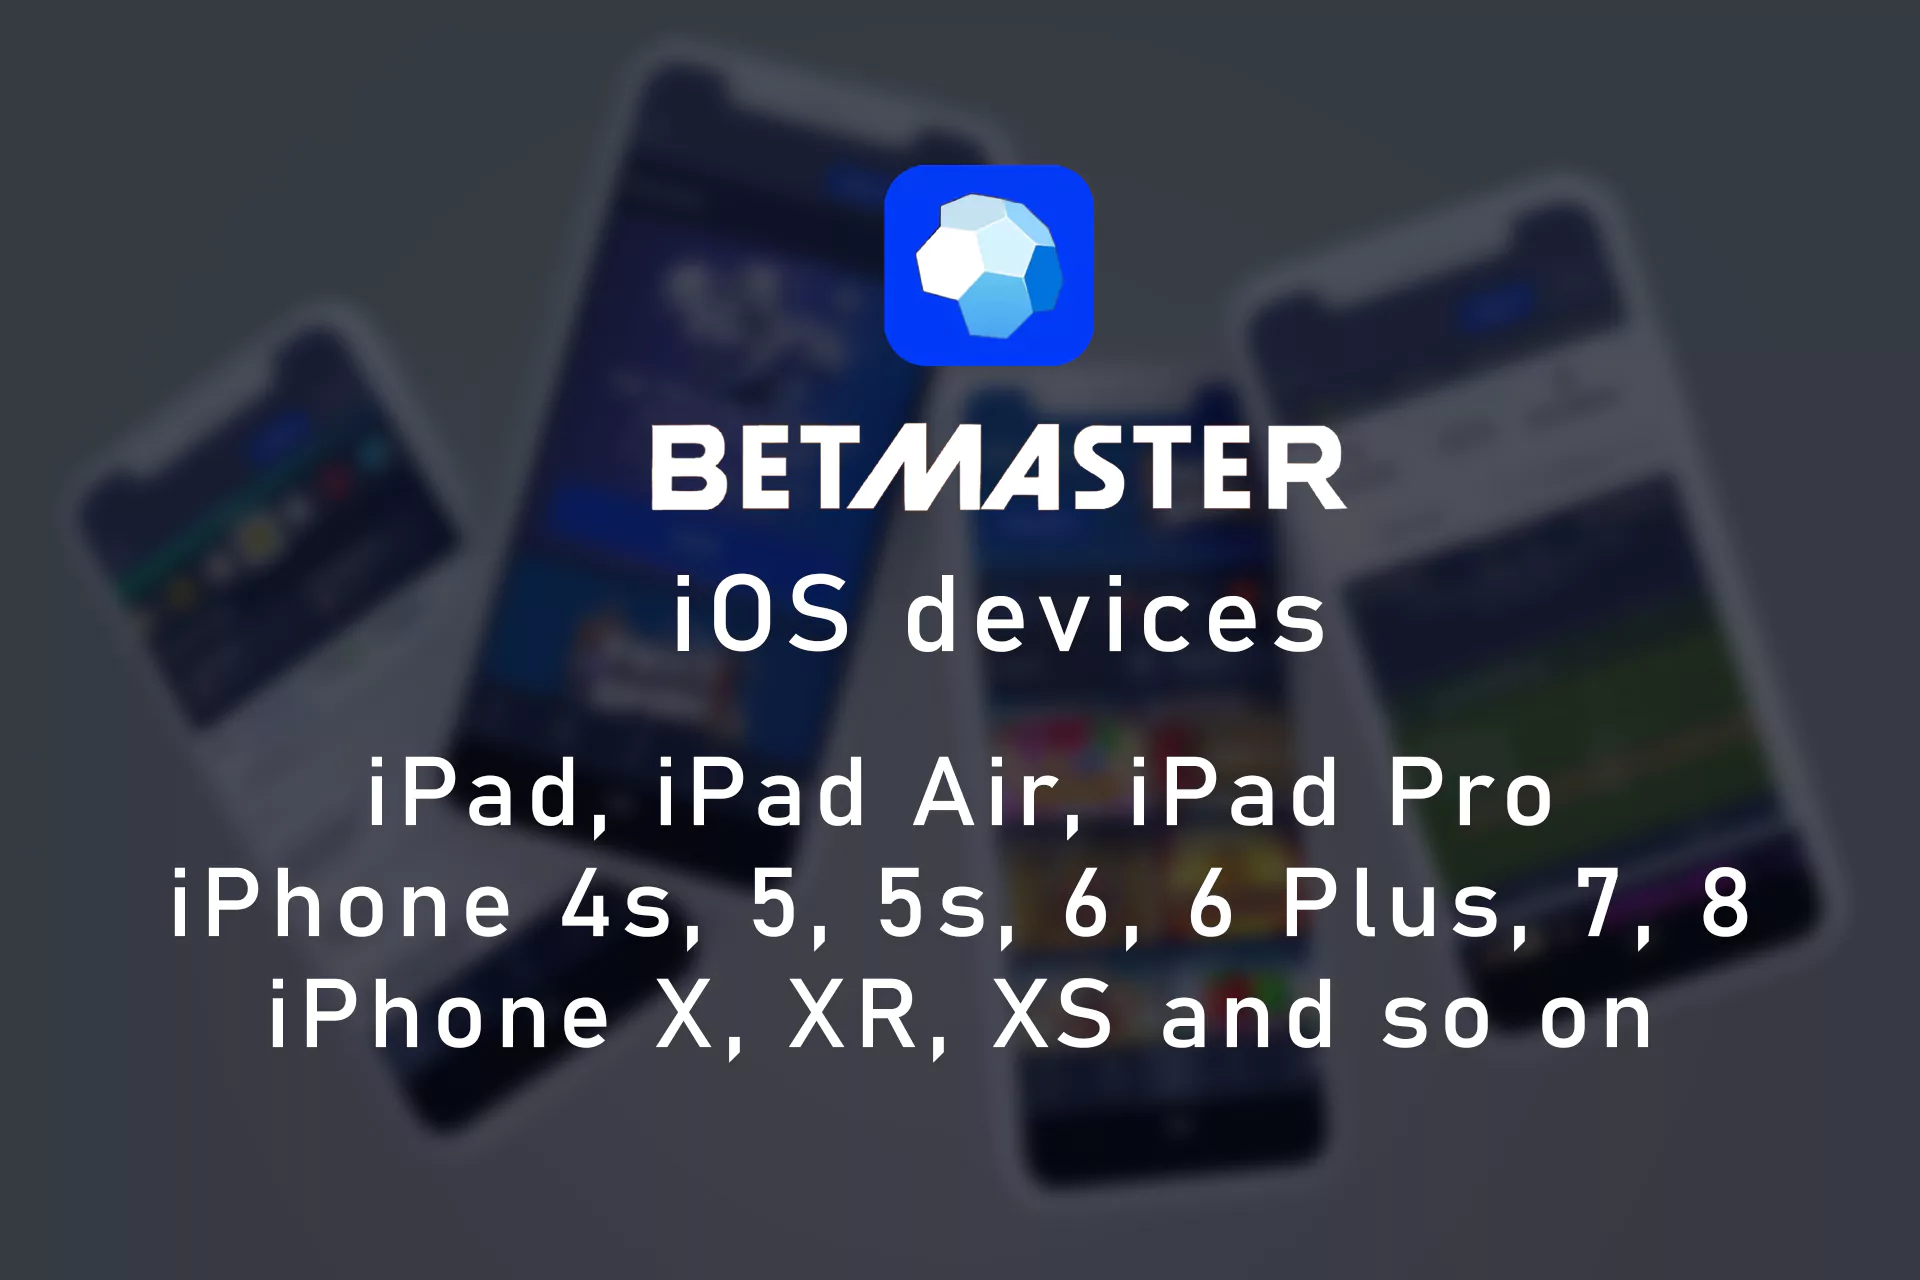 The app can be installed on most iOS devices.